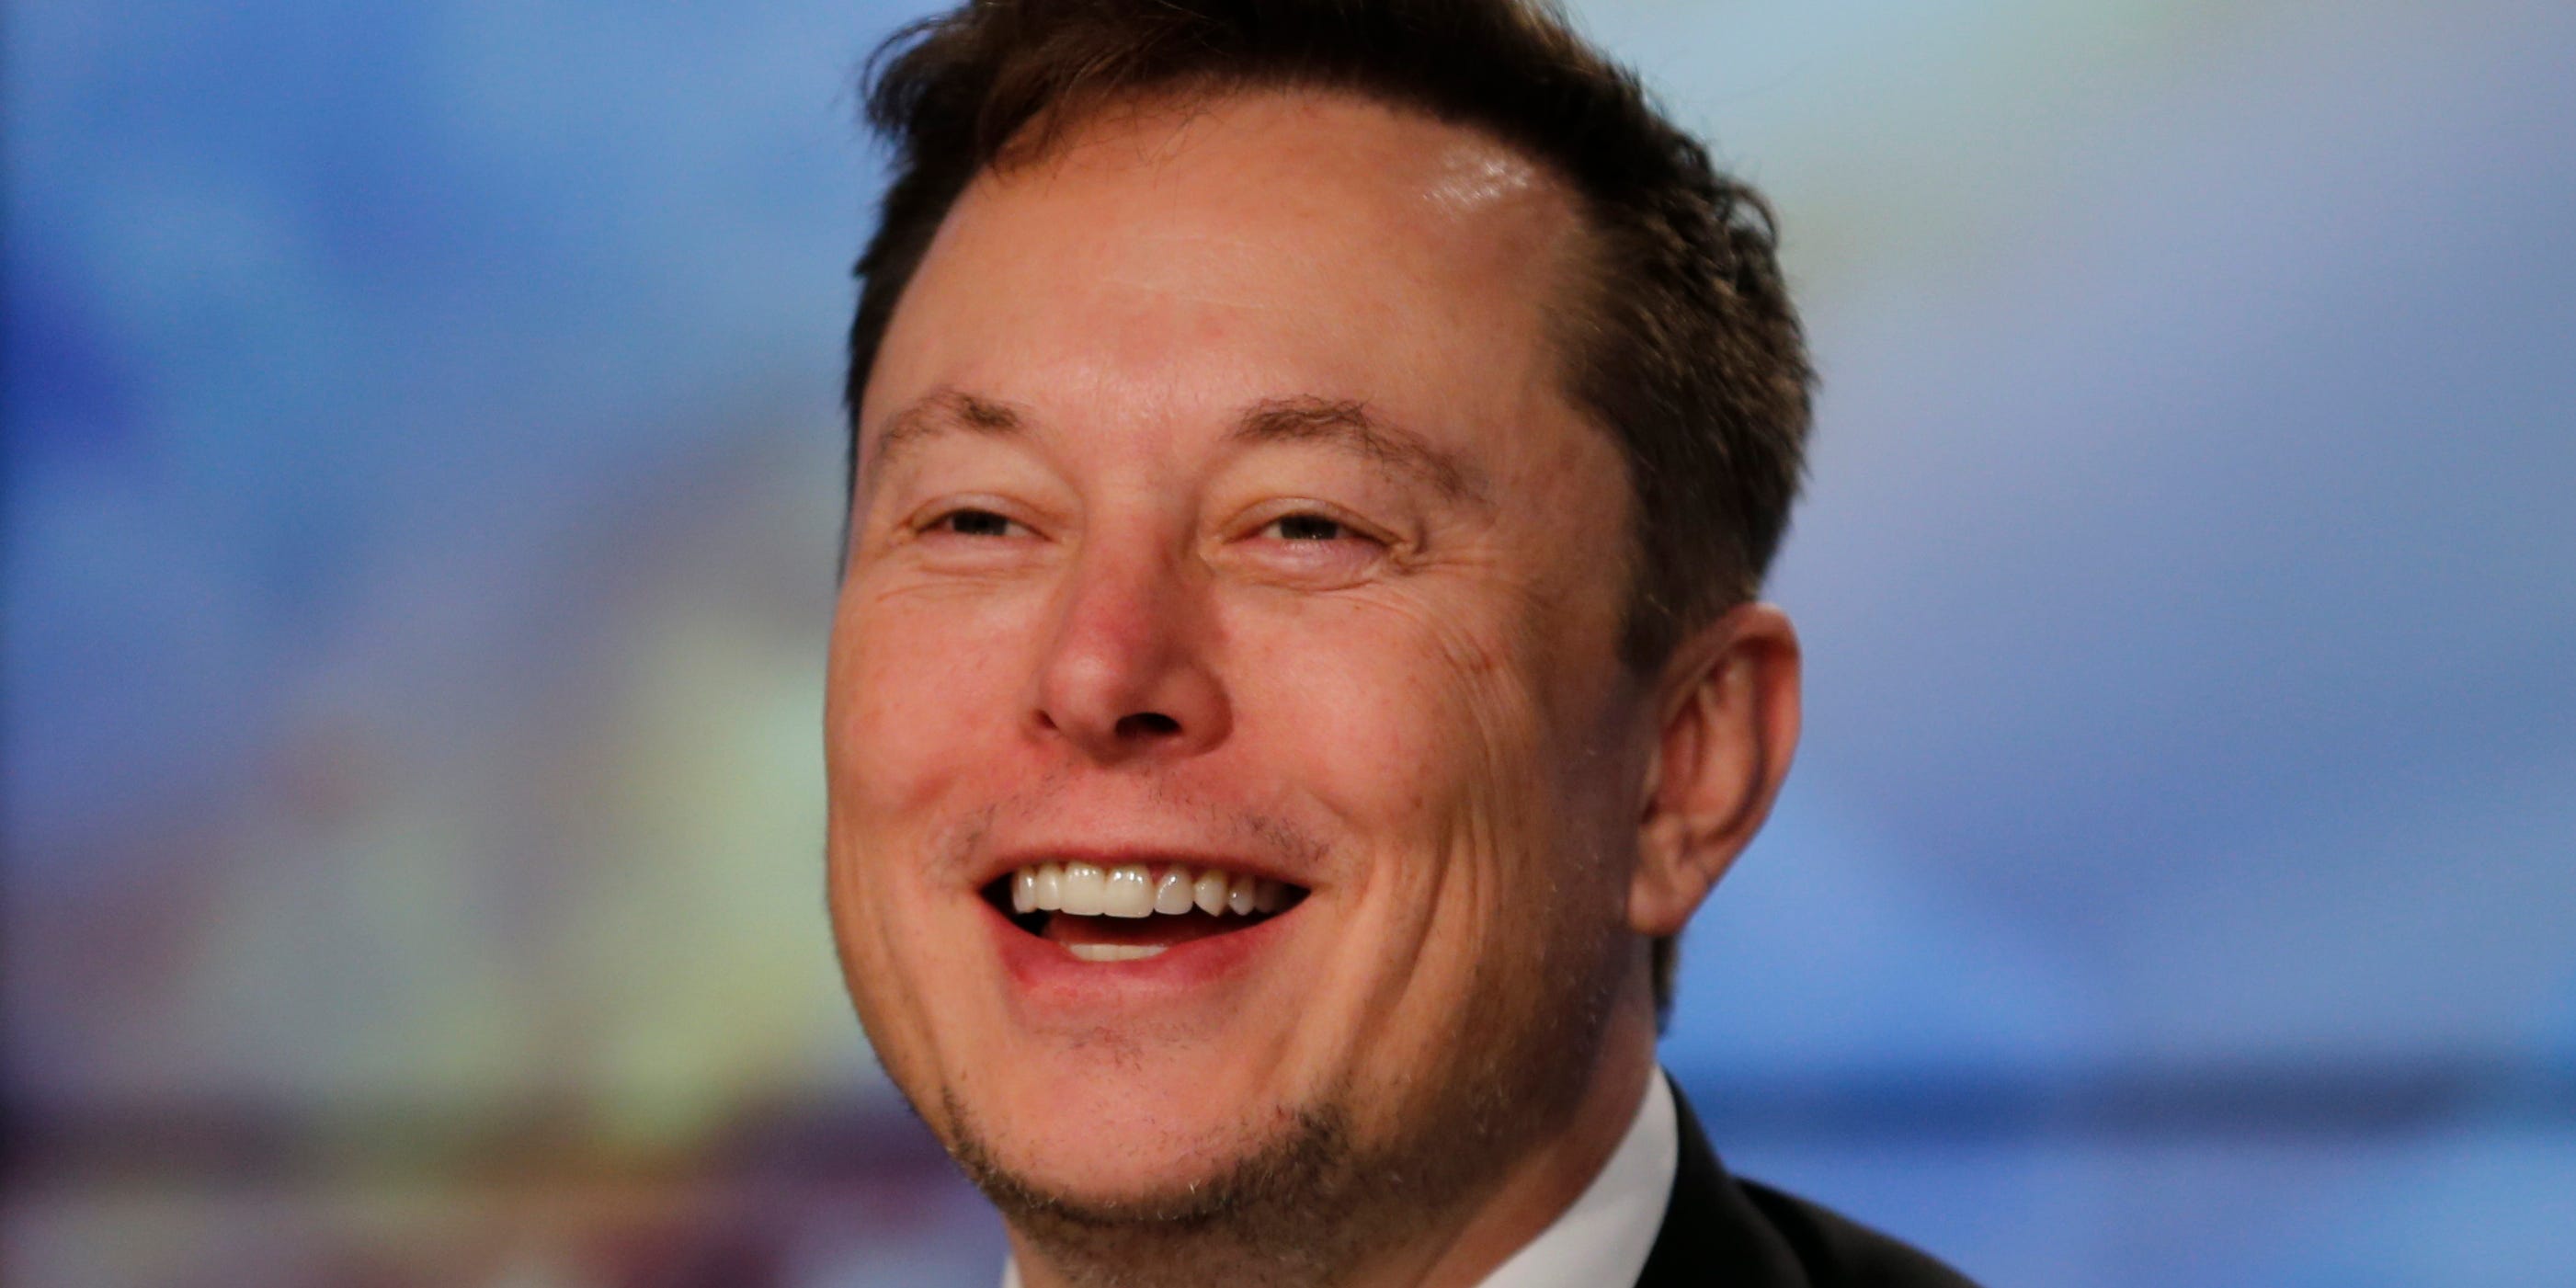 Elon Musk said Tesla is about to hike the price of its ‘full self-driving’ software by $2,000